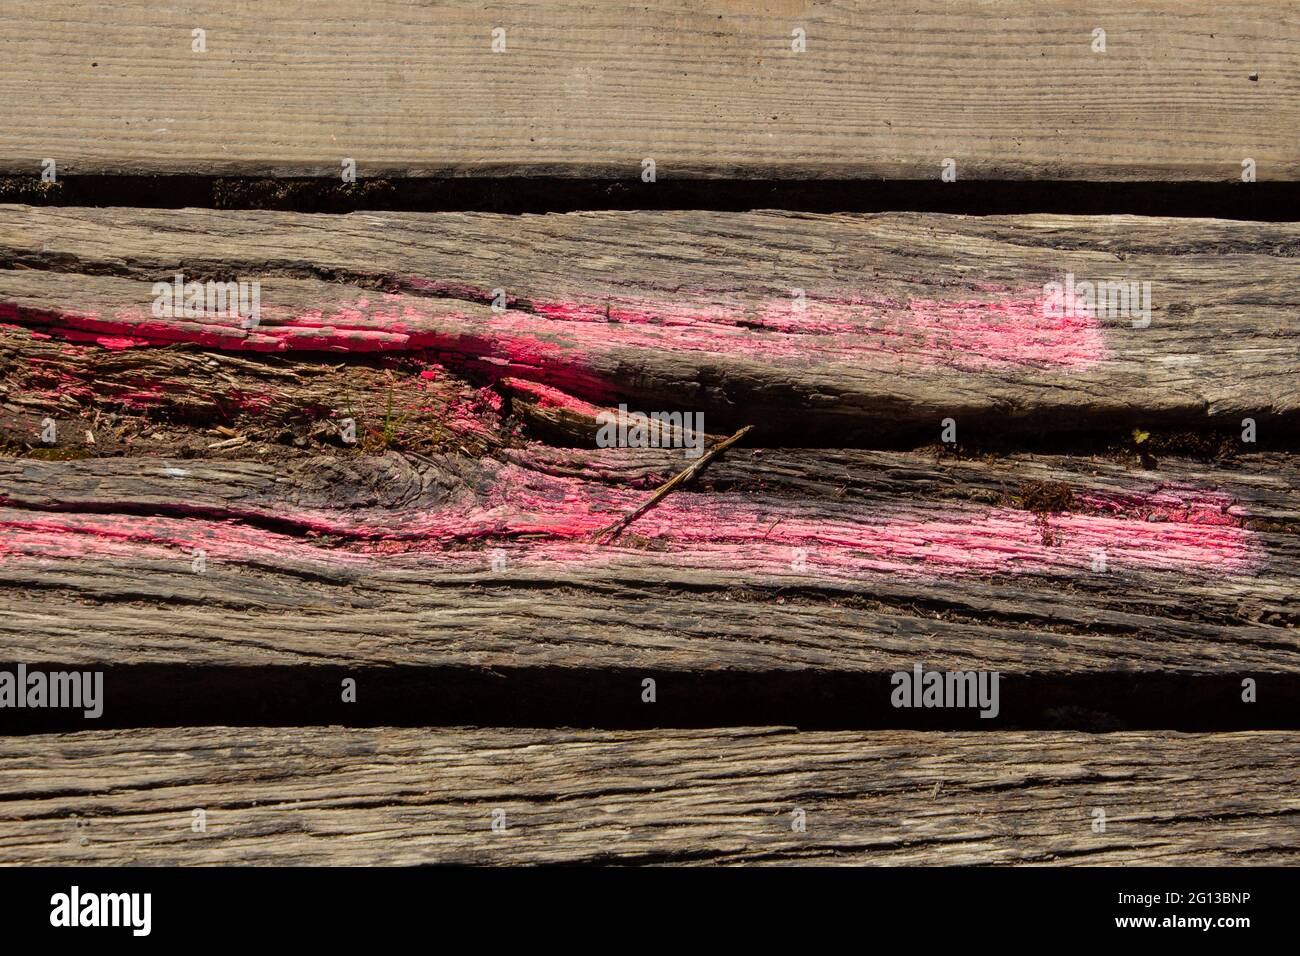 Damaged wooden planks with pink spray paint markings to mark as to renew Stock Photo